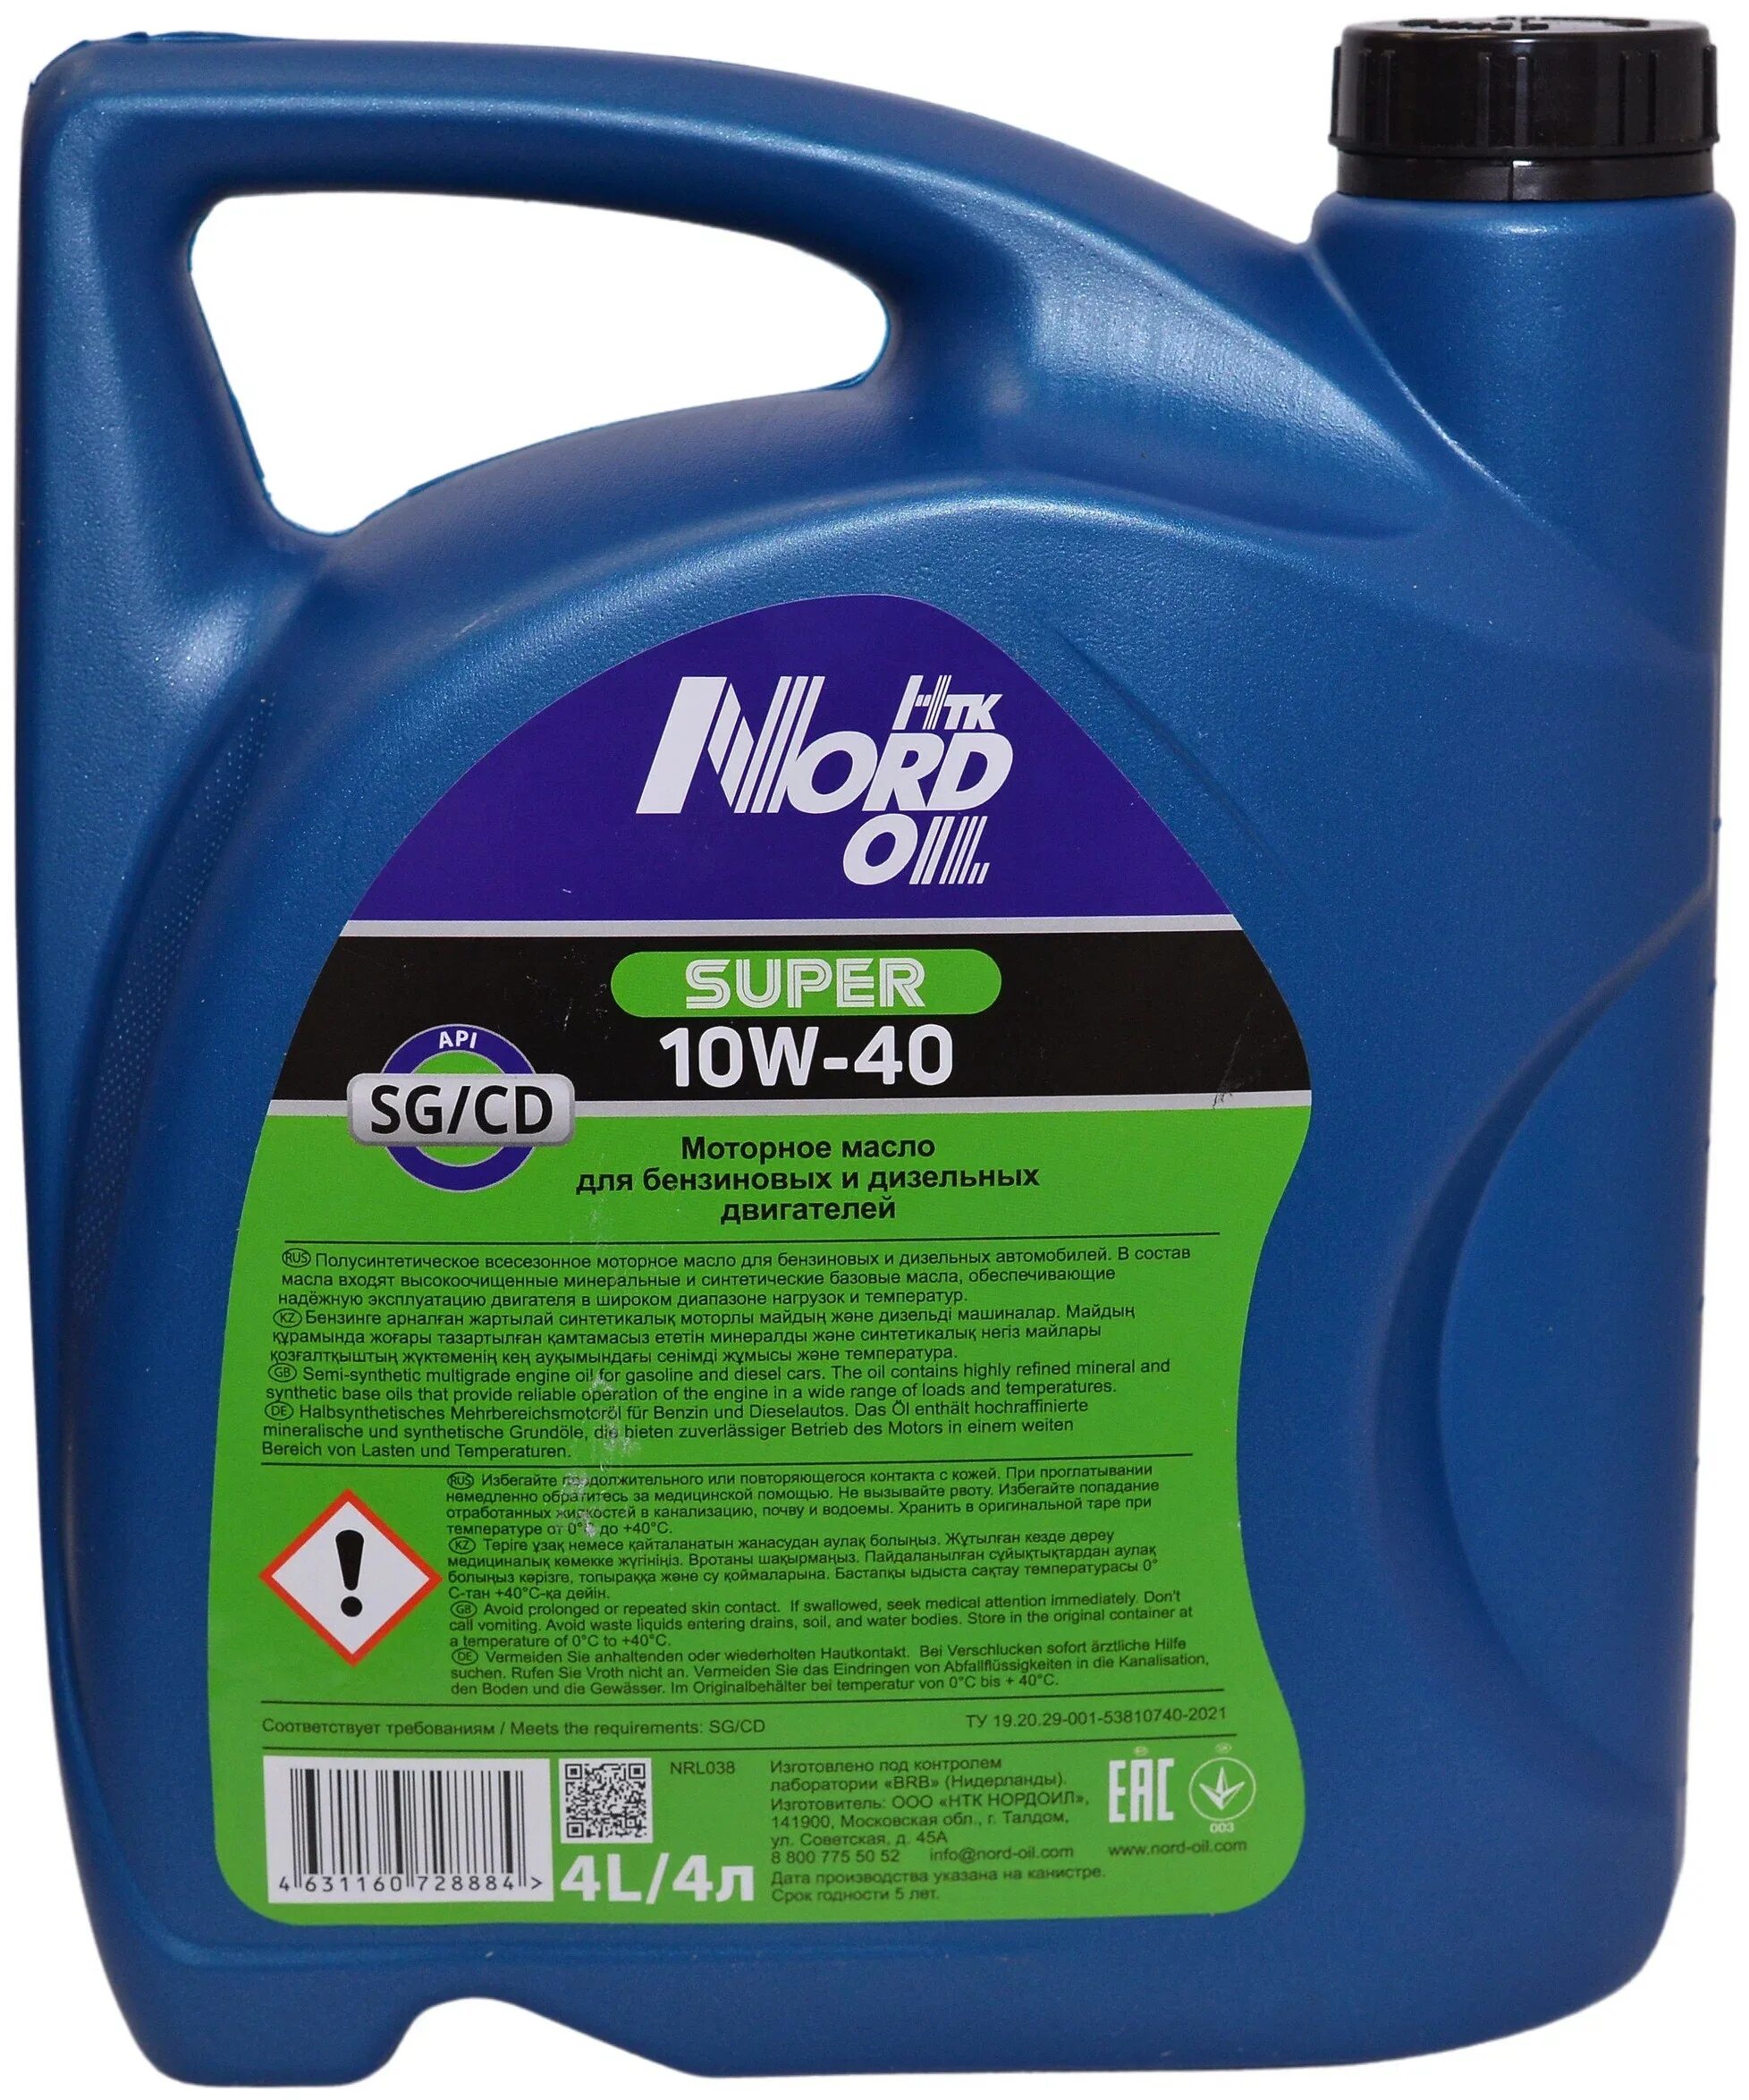 Nord Oil 10w-40. Масло Nord Oil 10 40. Nord Oil nrl038 масло моторное Nord Oil super 10w-4. Nrl038 Nord Oil масло Nord Oil super 10w-40 SG/CD 4л. Масло моторное 30 или 40